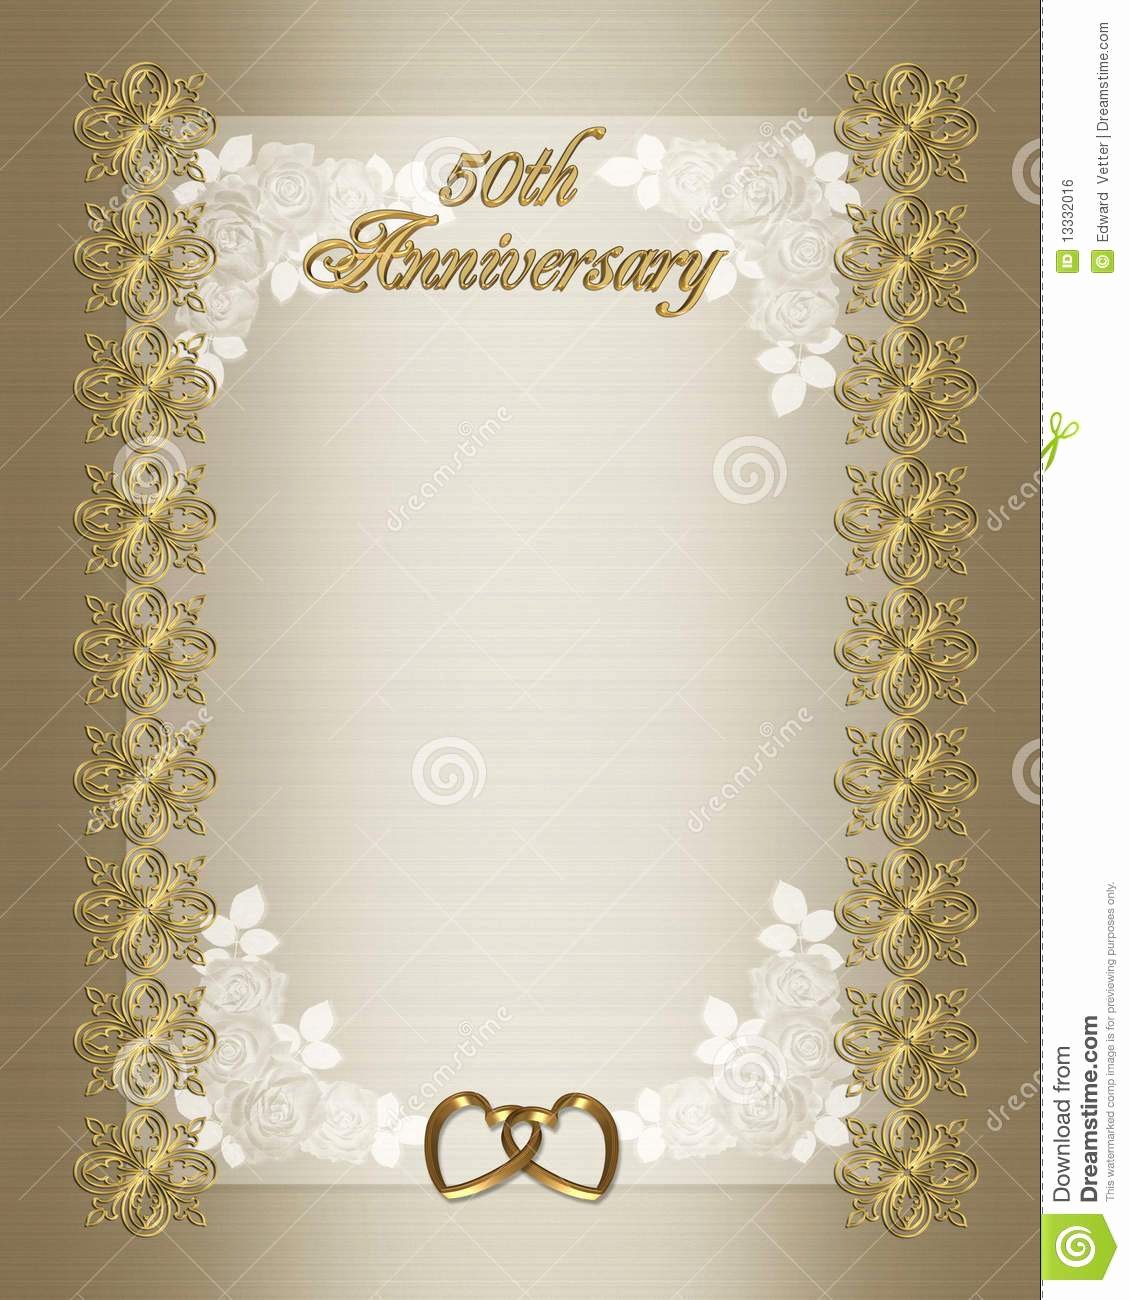 50th Wedding Anniversary Invitations Templates Beautiful 28 Of 40th Anniversary Borders Free Downloadable Template